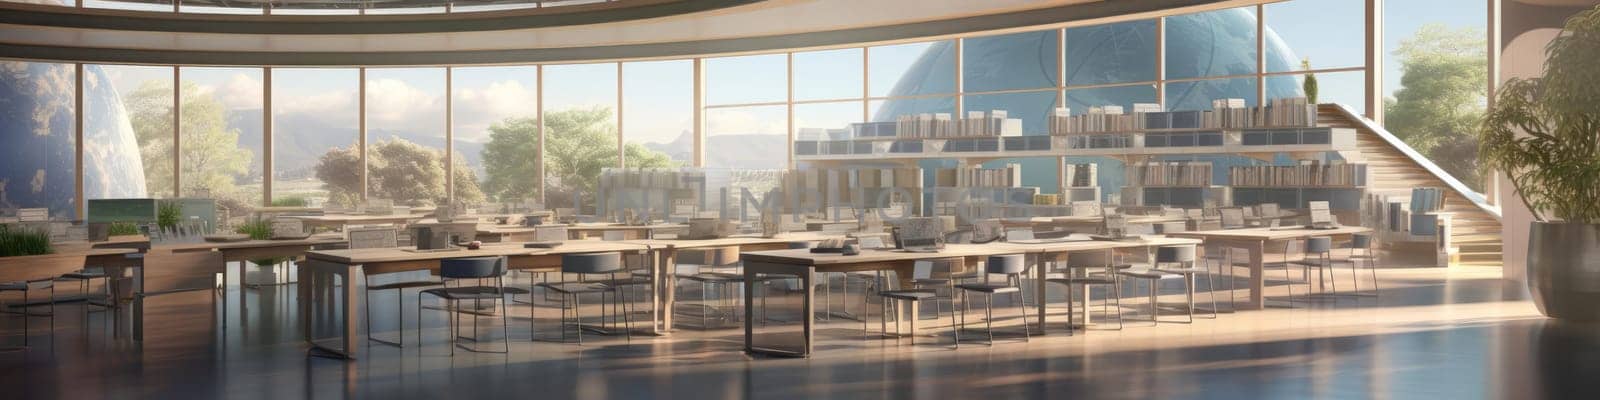 An empty large classroom of the future. The concept of education in the future